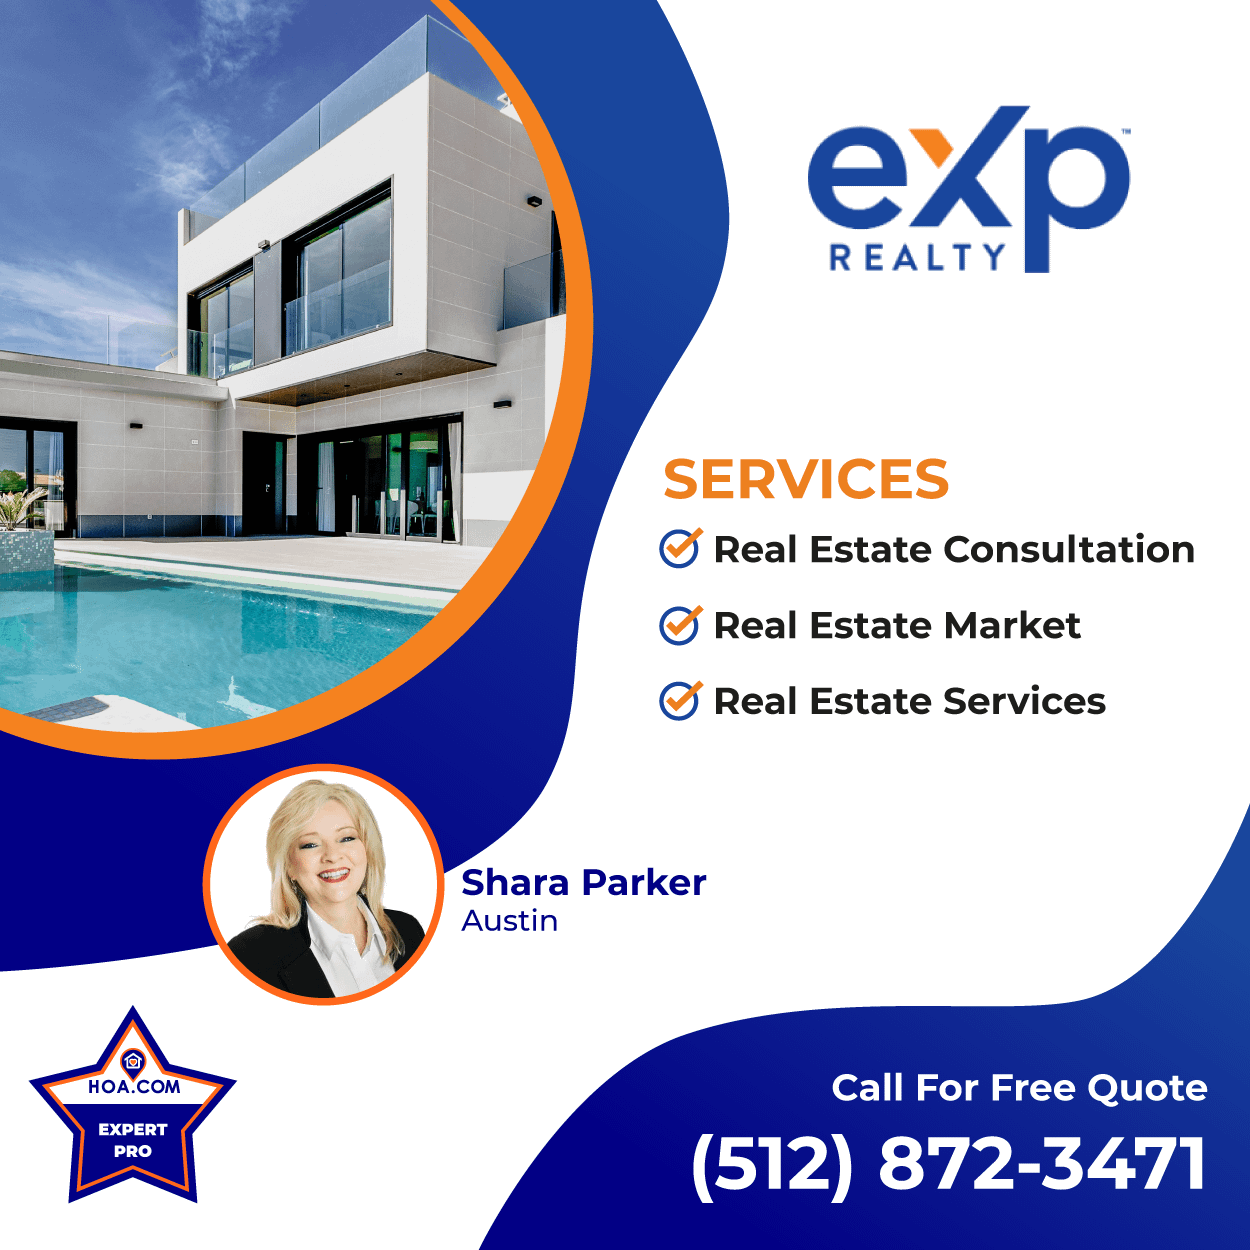 Services of eXp Realty Shara Parker